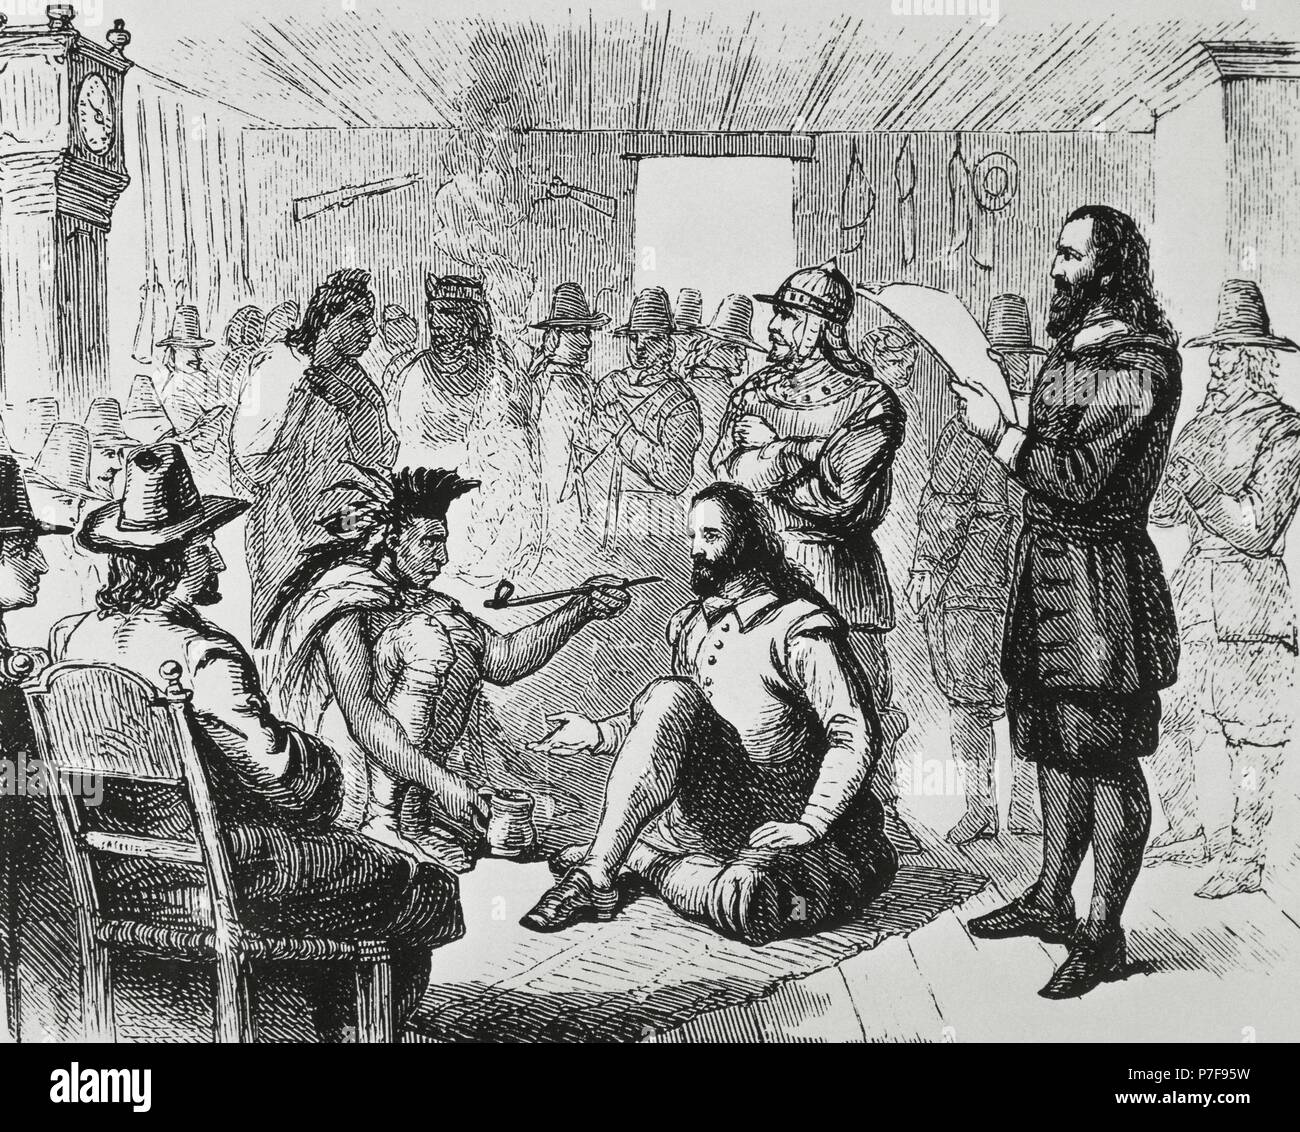 Colonization of North America (1607-1755). Massasoit (c. 1581-1661), sachem of the Wampanoags, smoking a ceremonial pipe with the Plymouth Colony Governor, John Carver (before 1584-1621). Plymouth 1621. Engraving. Stock Photo